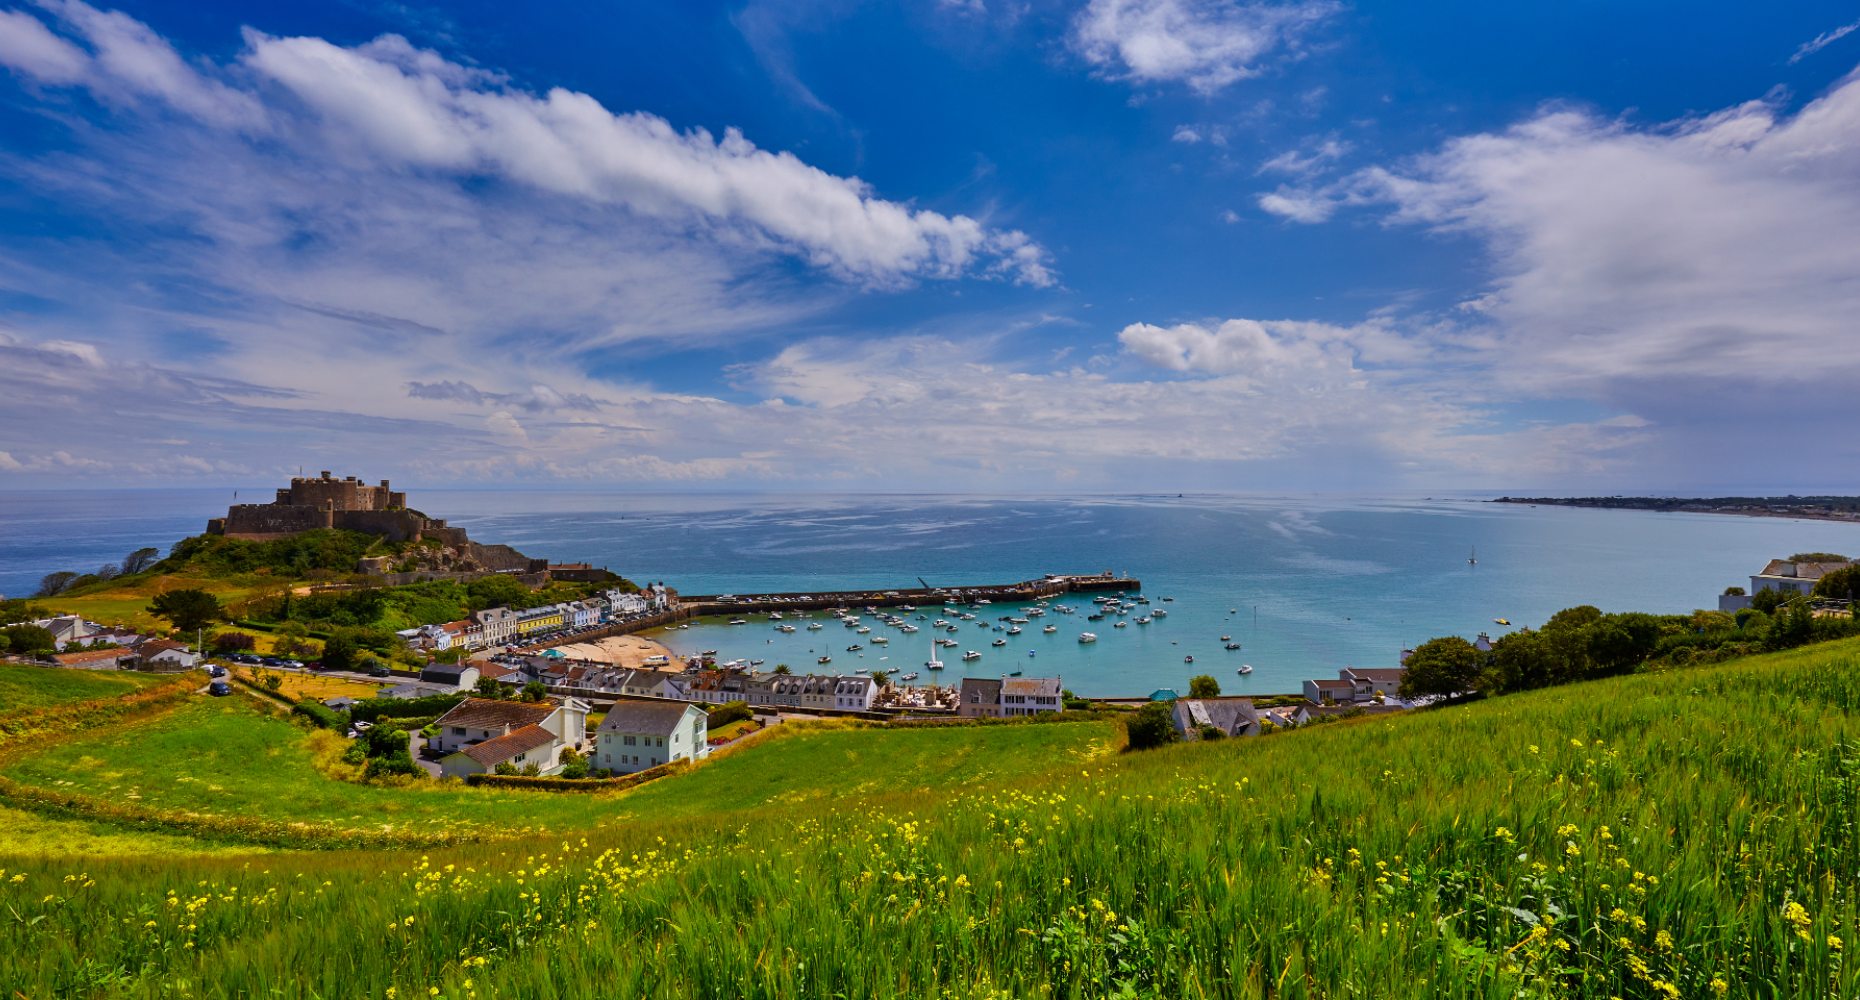 The island of Jersey [image: Gary Le Feuvre/Shutterstock]